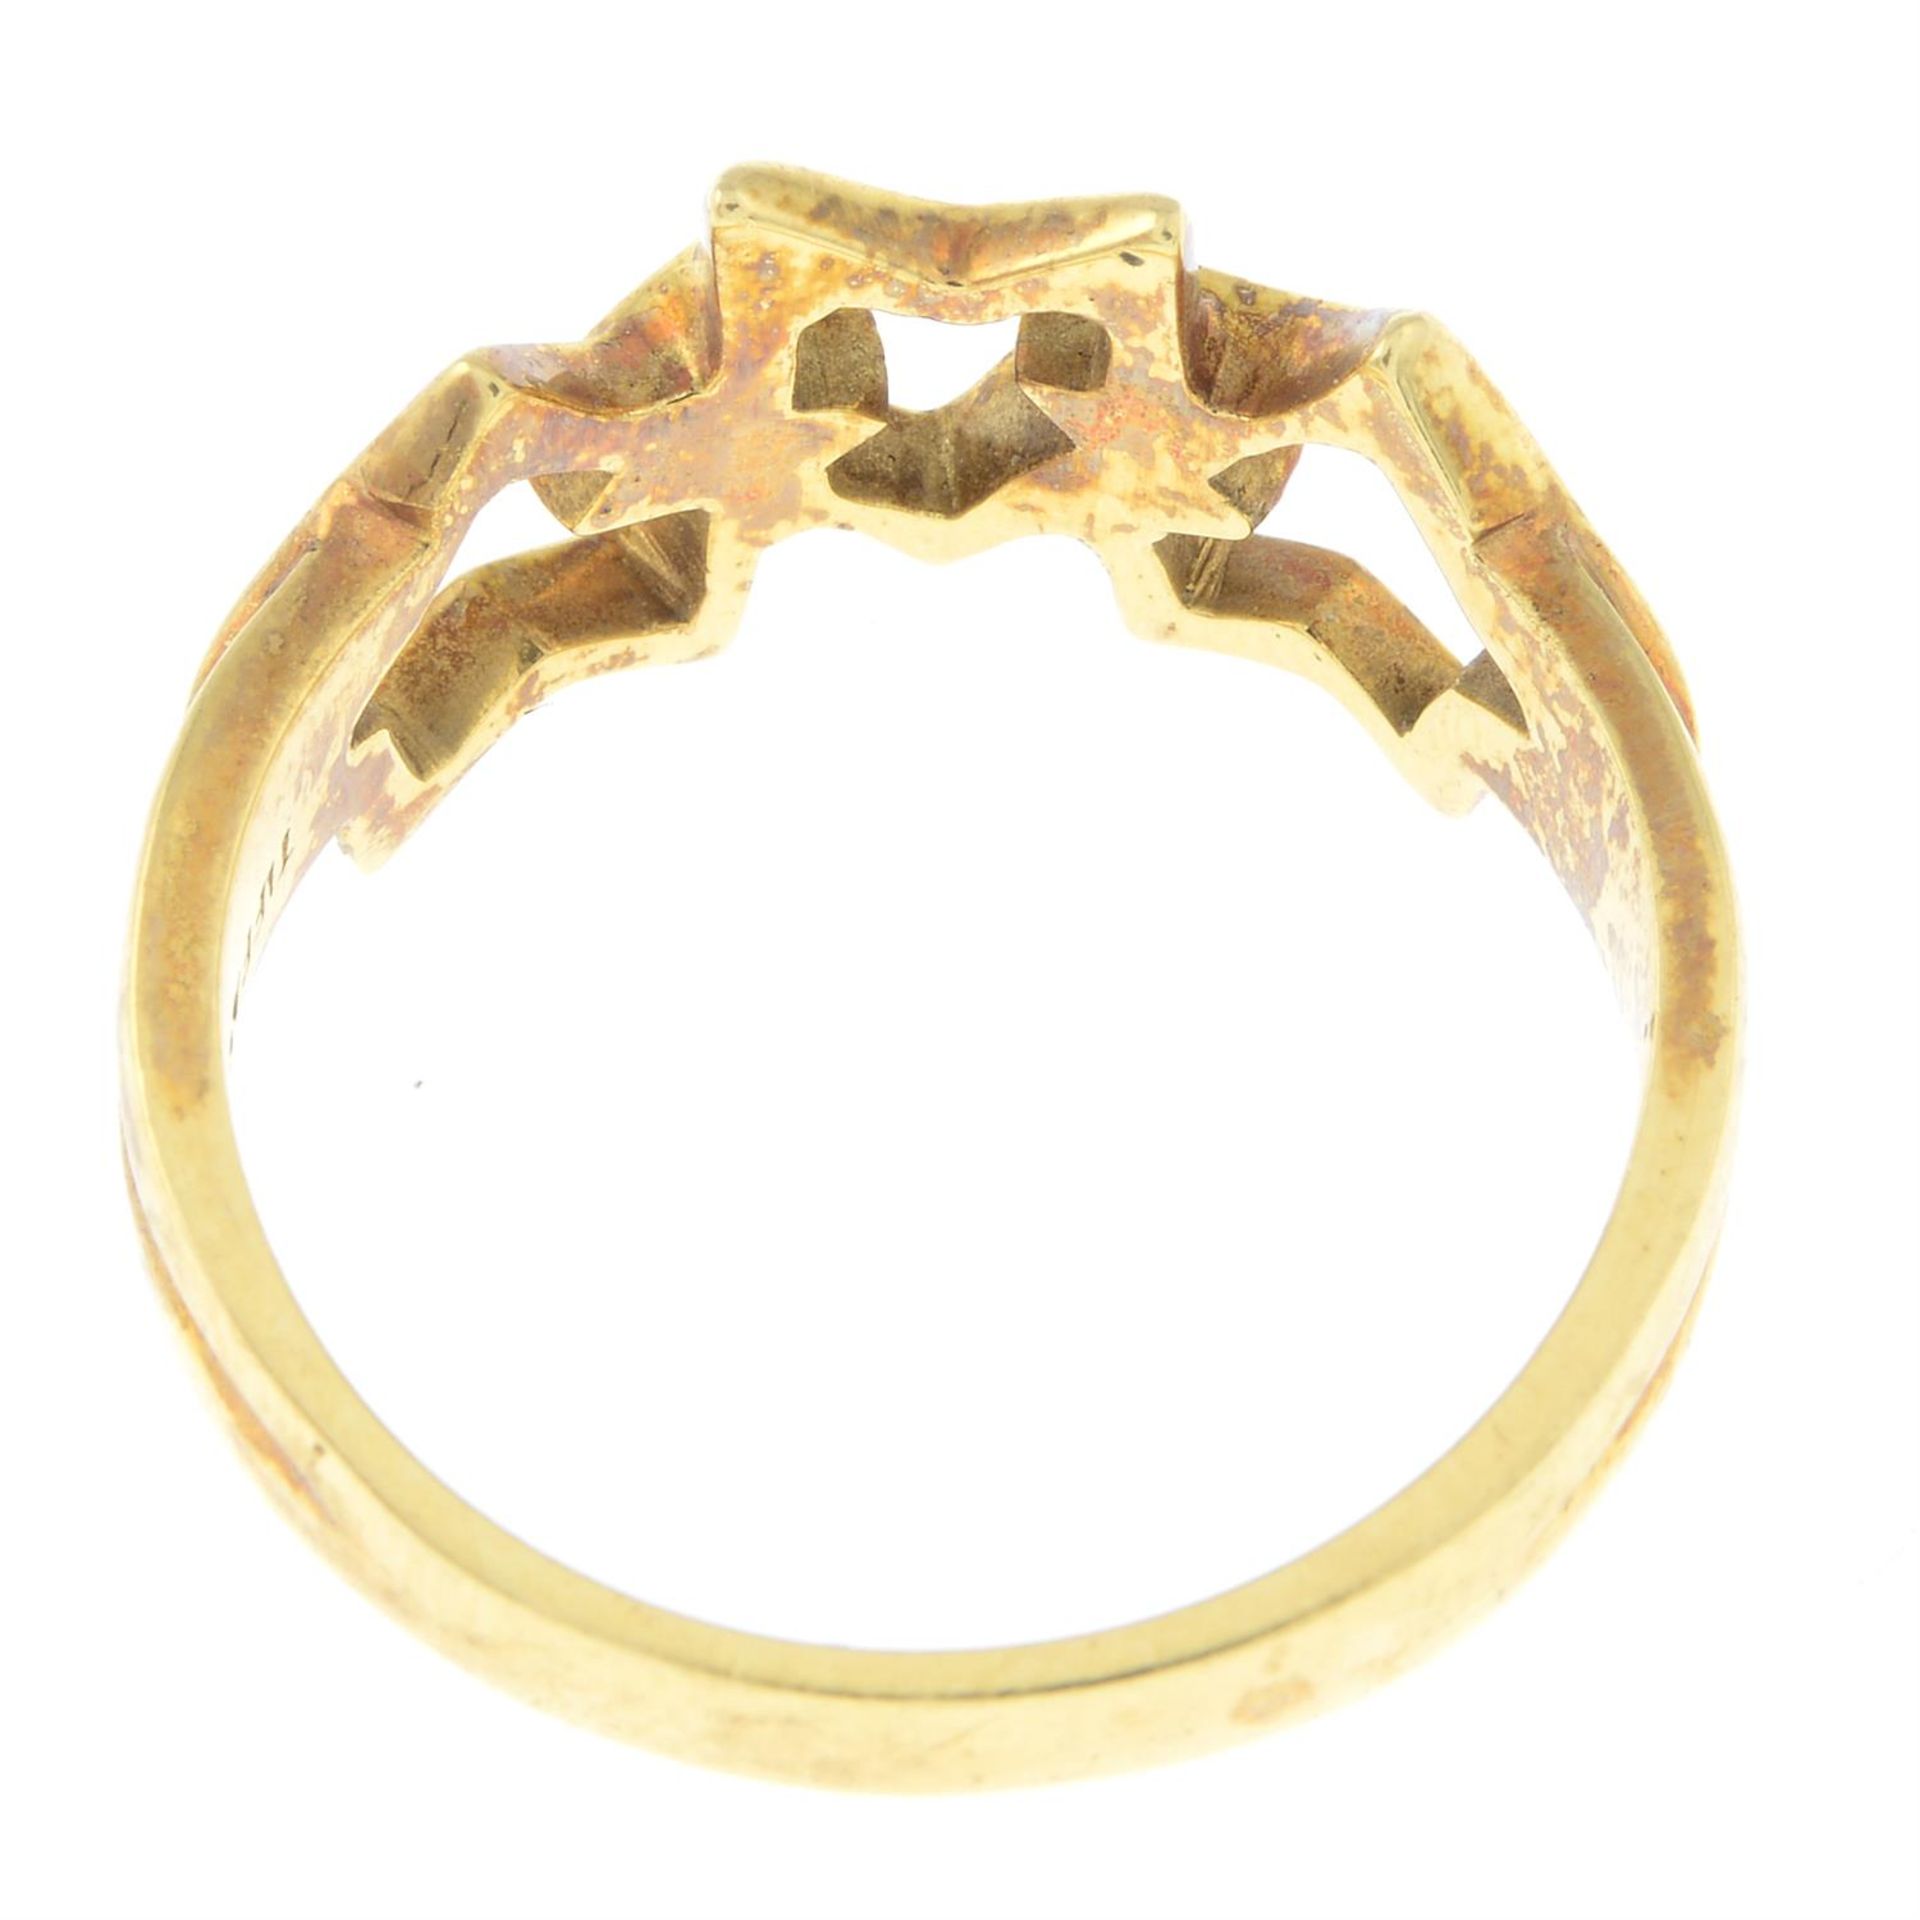 An interlocking star ring, by Tiffany & Co. - Image 2 of 2